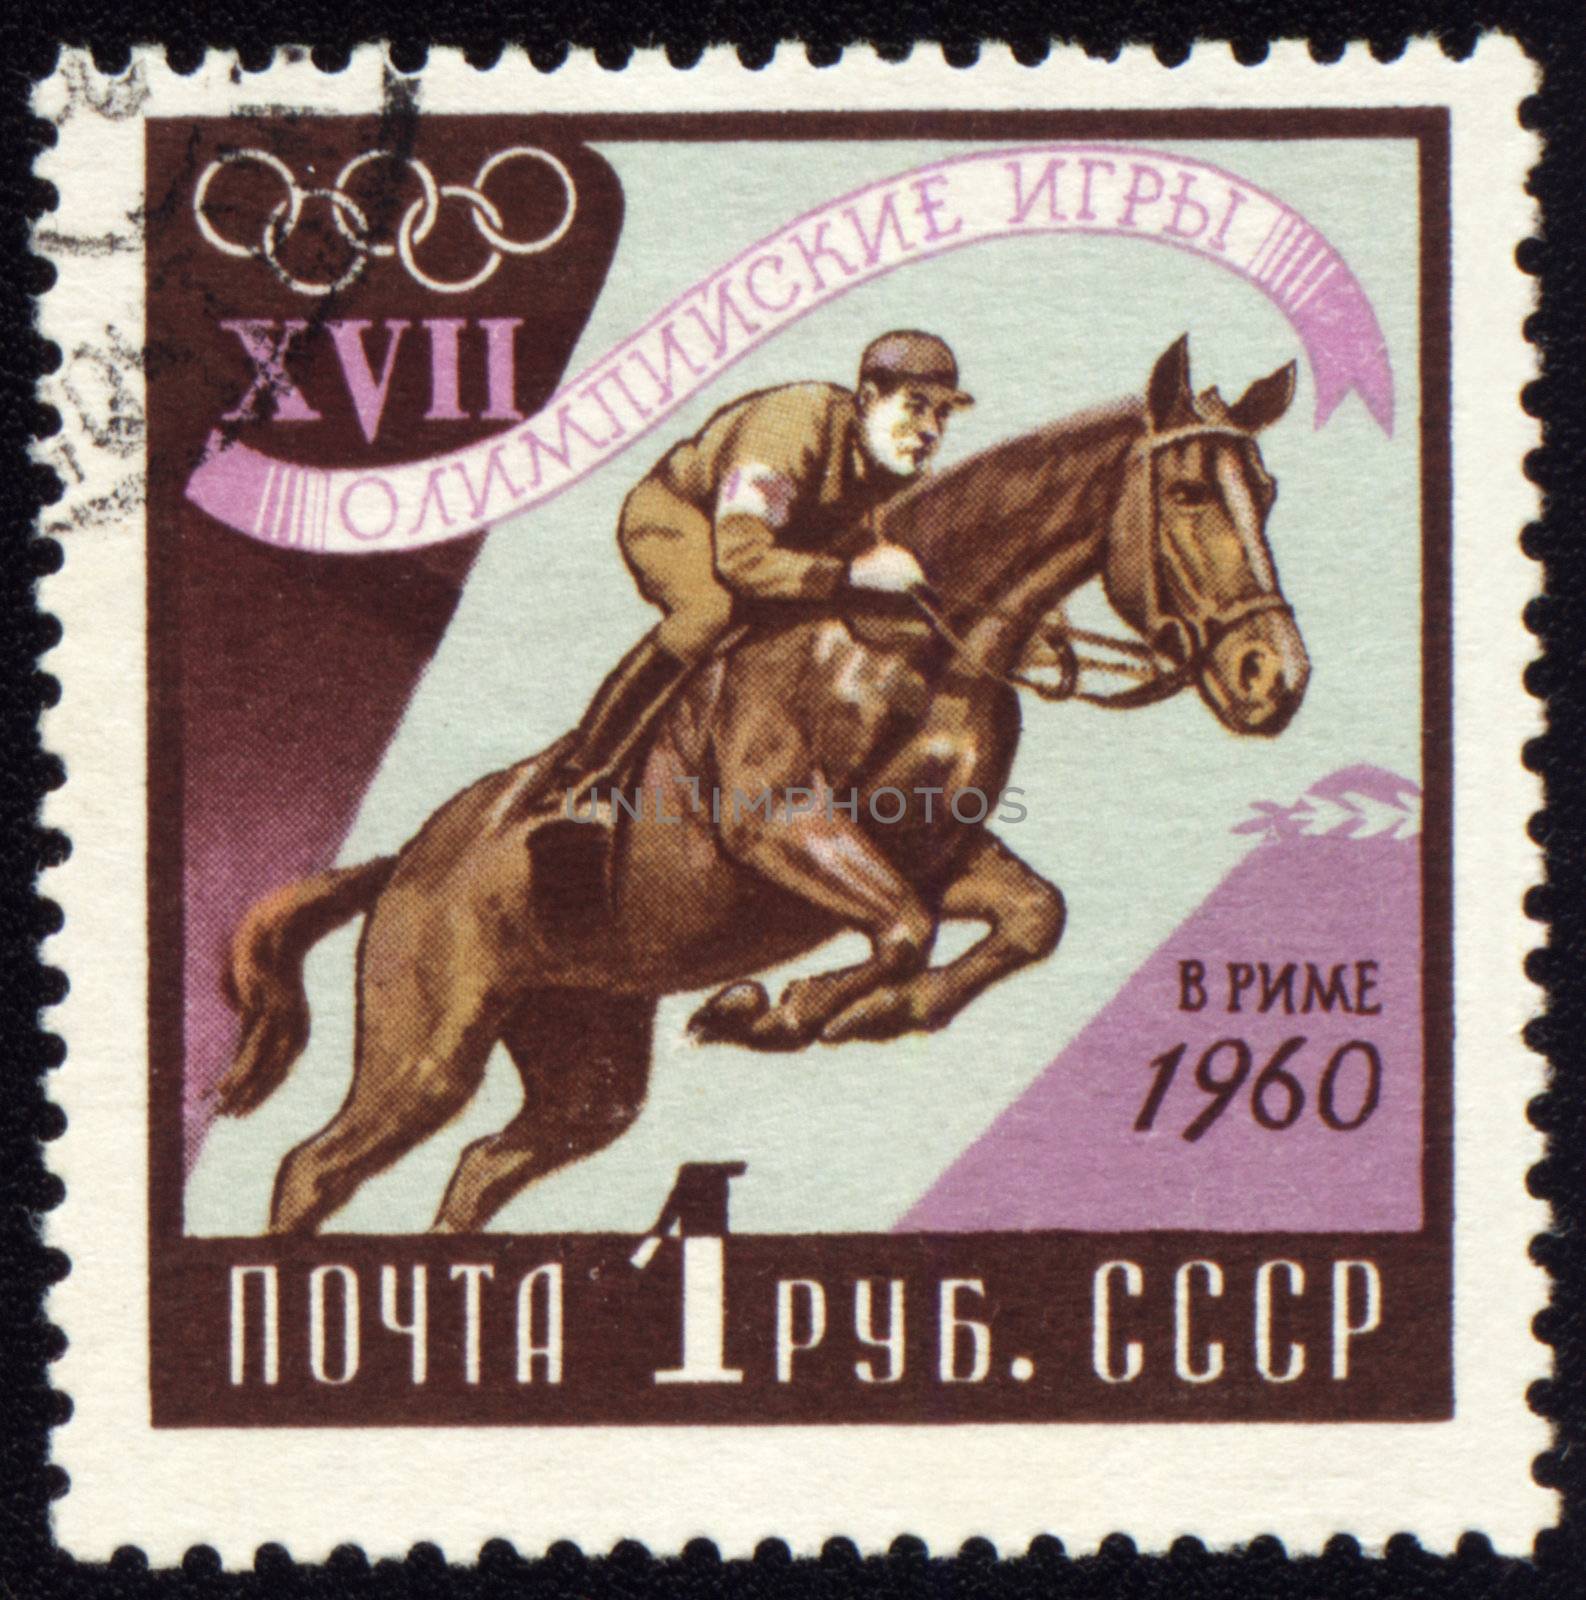 USSR - CIRCA 1960: A post stamp printed in USSR shows horse jumping show, devoted to Olympic games in Rome, series, circa 1960